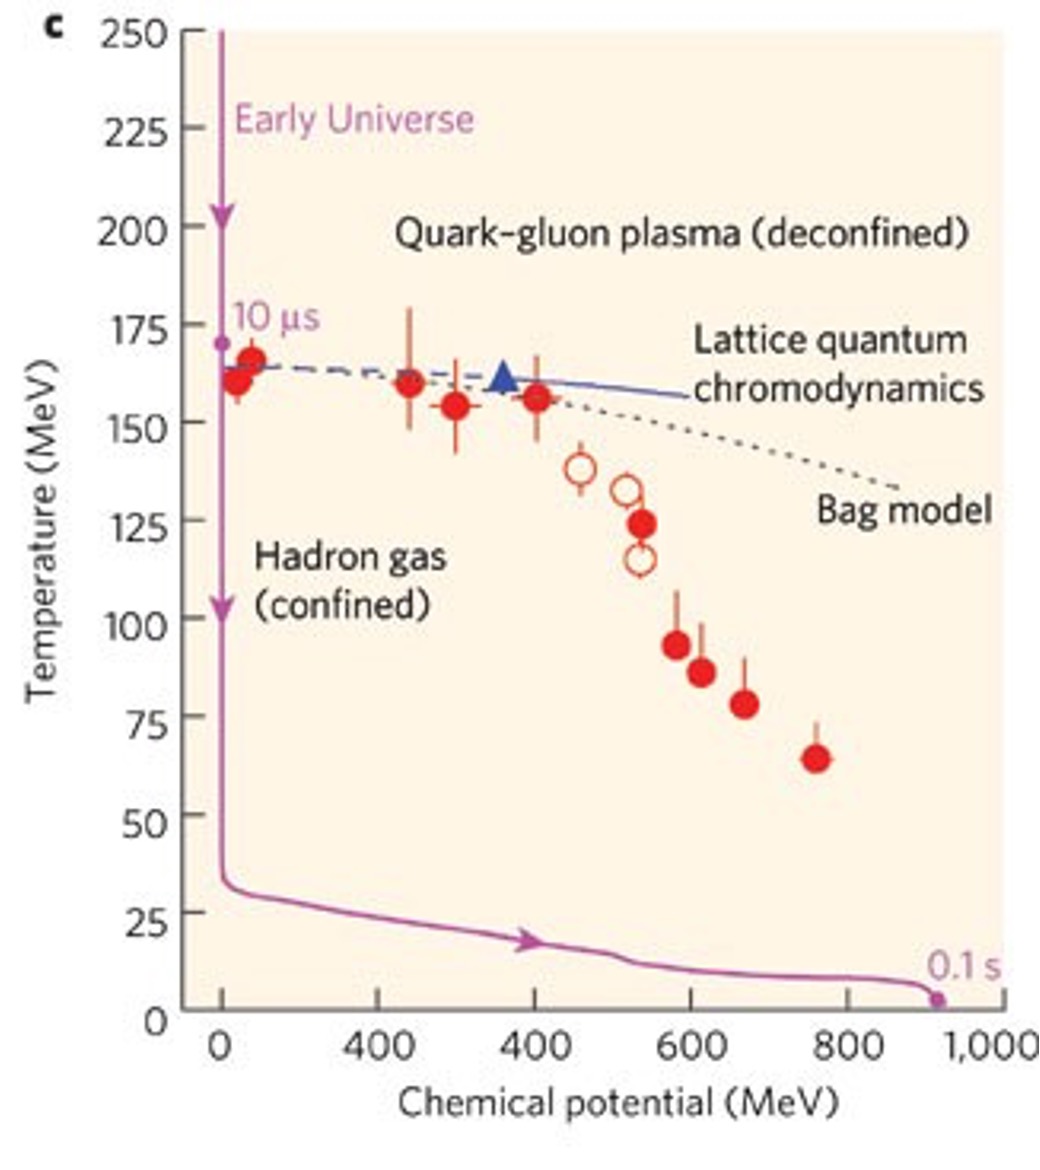 Figure 1. The evolution of the early Universe is shown, as are theoretical expectations such as from lattice quantum chromodynamics (blue line) and the bag model (dotted line) for the phase boundary between confined and deconfined matter. Red-filled circles are from analysis of midrapidity data. Open circles are from the analysis of 4π data. The blue triangle is the possible position of a critical endpoint. See ref. (6) for more details.